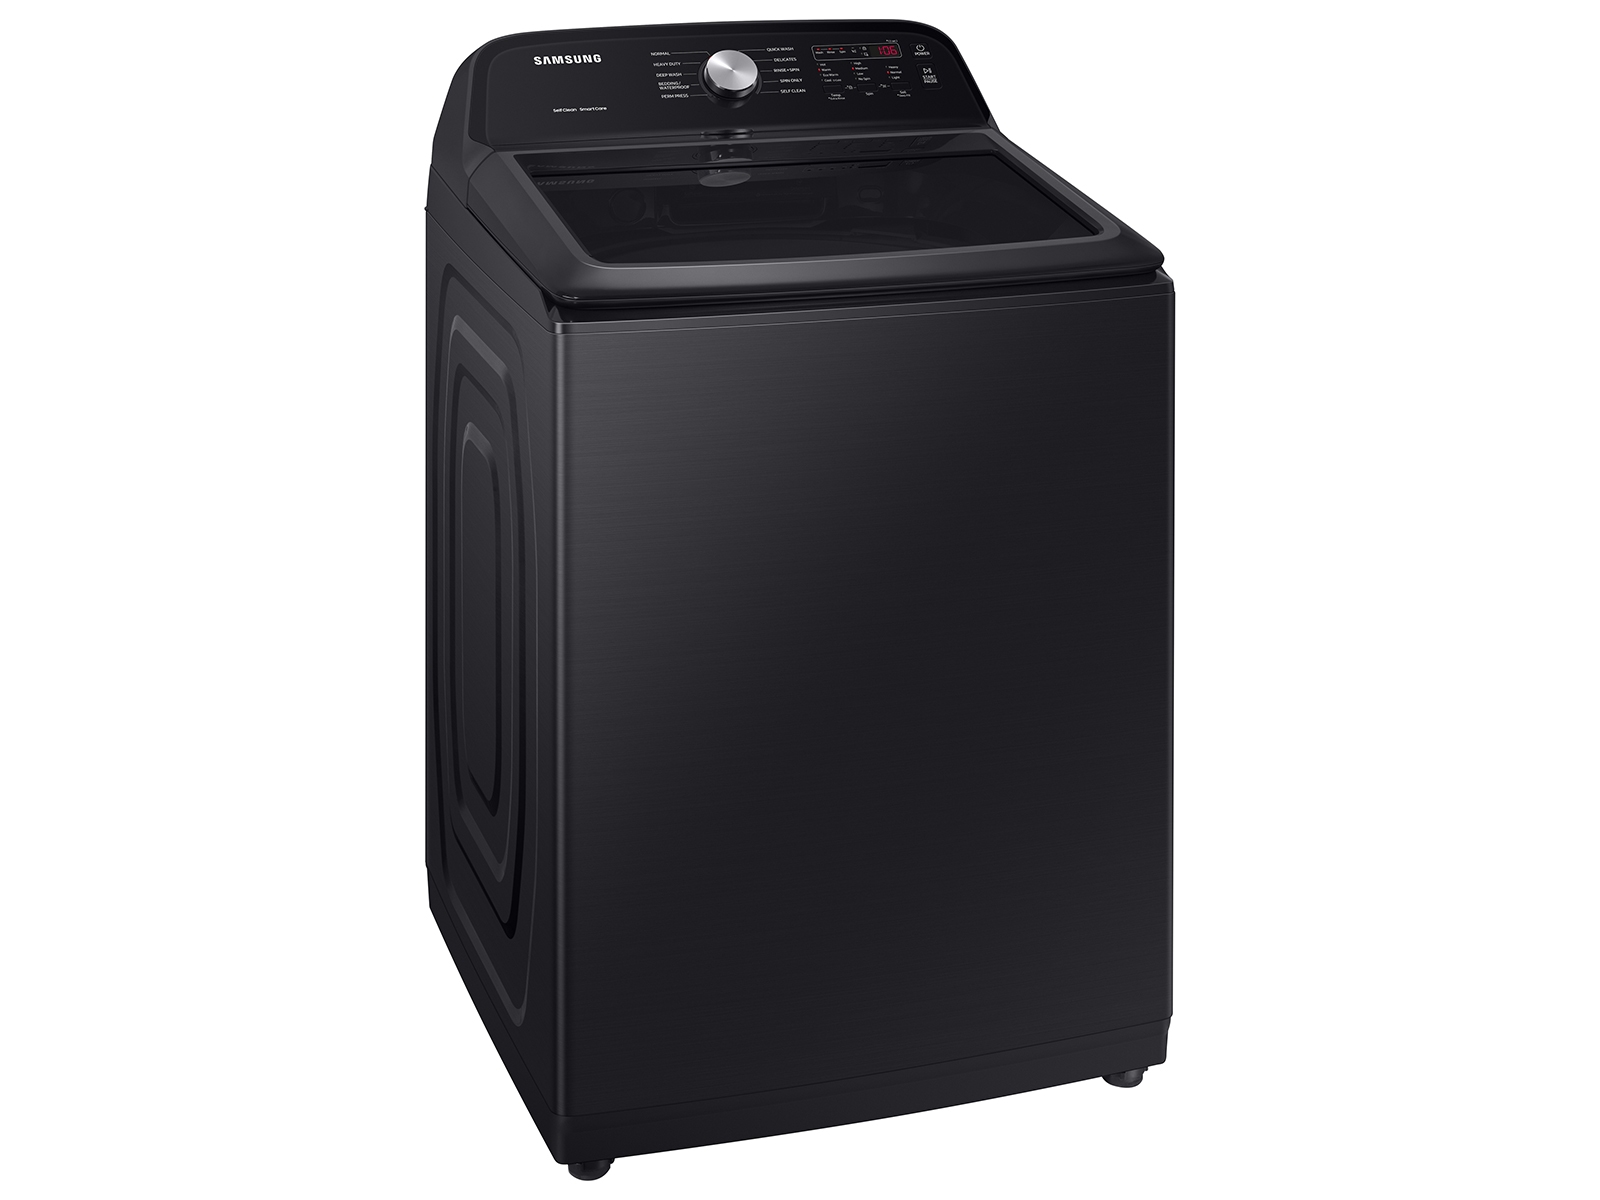 5.0 cu. ft. Capacity Top Load Washer with Deep Fill and EZ Access Tub in Brushed Black Washers - WA50B5100AV/US | US